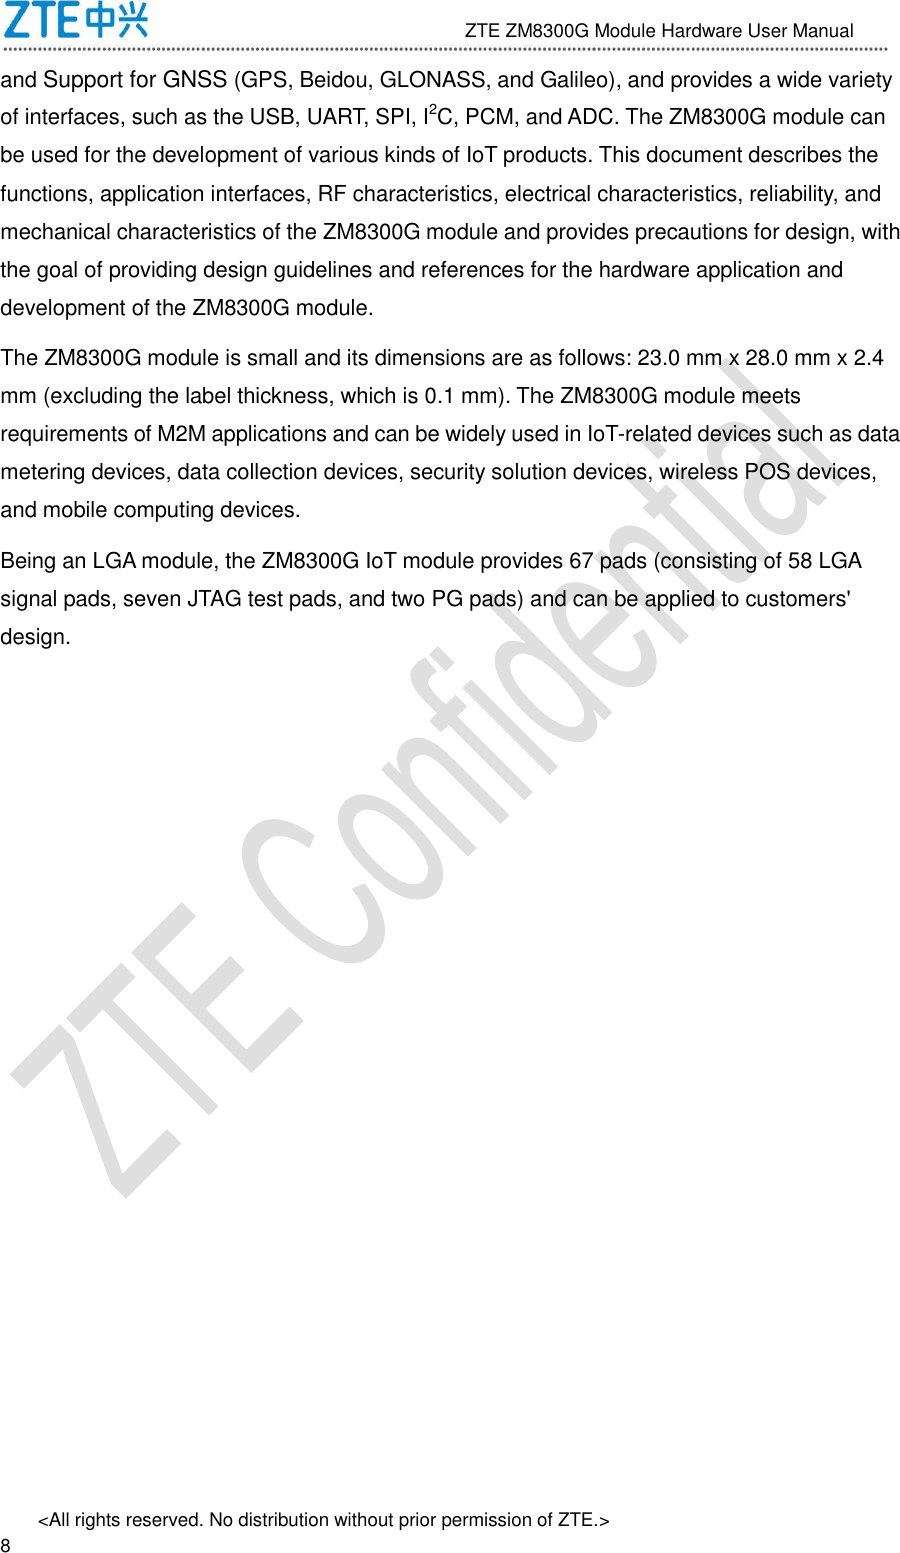                              ZTE ZM8300G Module Hardware User Manual &lt;All rights reserved. No distribution without prior permission of ZTE.&gt;                                                               8 and Support for GNSS (GPS, Beidou, GLONASS, and Galileo), and provides a wide variety of interfaces, such as the USB, UART, SPI, I2C, PCM, and ADC. The ZM8300G module can be used for the development of various kinds of IoT products. This document describes the functions, application interfaces, RF characteristics, electrical characteristics, reliability, and mechanical characteristics of the ZM8300G module and provides precautions for design, with the goal of providing design guidelines and references for the hardware application and development of the ZM8300G module. The ZM8300G module is small and its dimensions are as follows: 23.0 mm x 28.0 mm x 2.4 mm (excluding the label thickness, which is 0.1 mm). The ZM8300G module meets requirements of M2M applications and can be widely used in IoT-related devices such as data metering devices, data collection devices, security solution devices, wireless POS devices, and mobile computing devices. Being an LGA module, the ZM8300G IoT module provides 67 pads (consisting of 58 LGA signal pads, seven JTAG test pads, and two PG pads) and can be applied to customers&apos; design.    